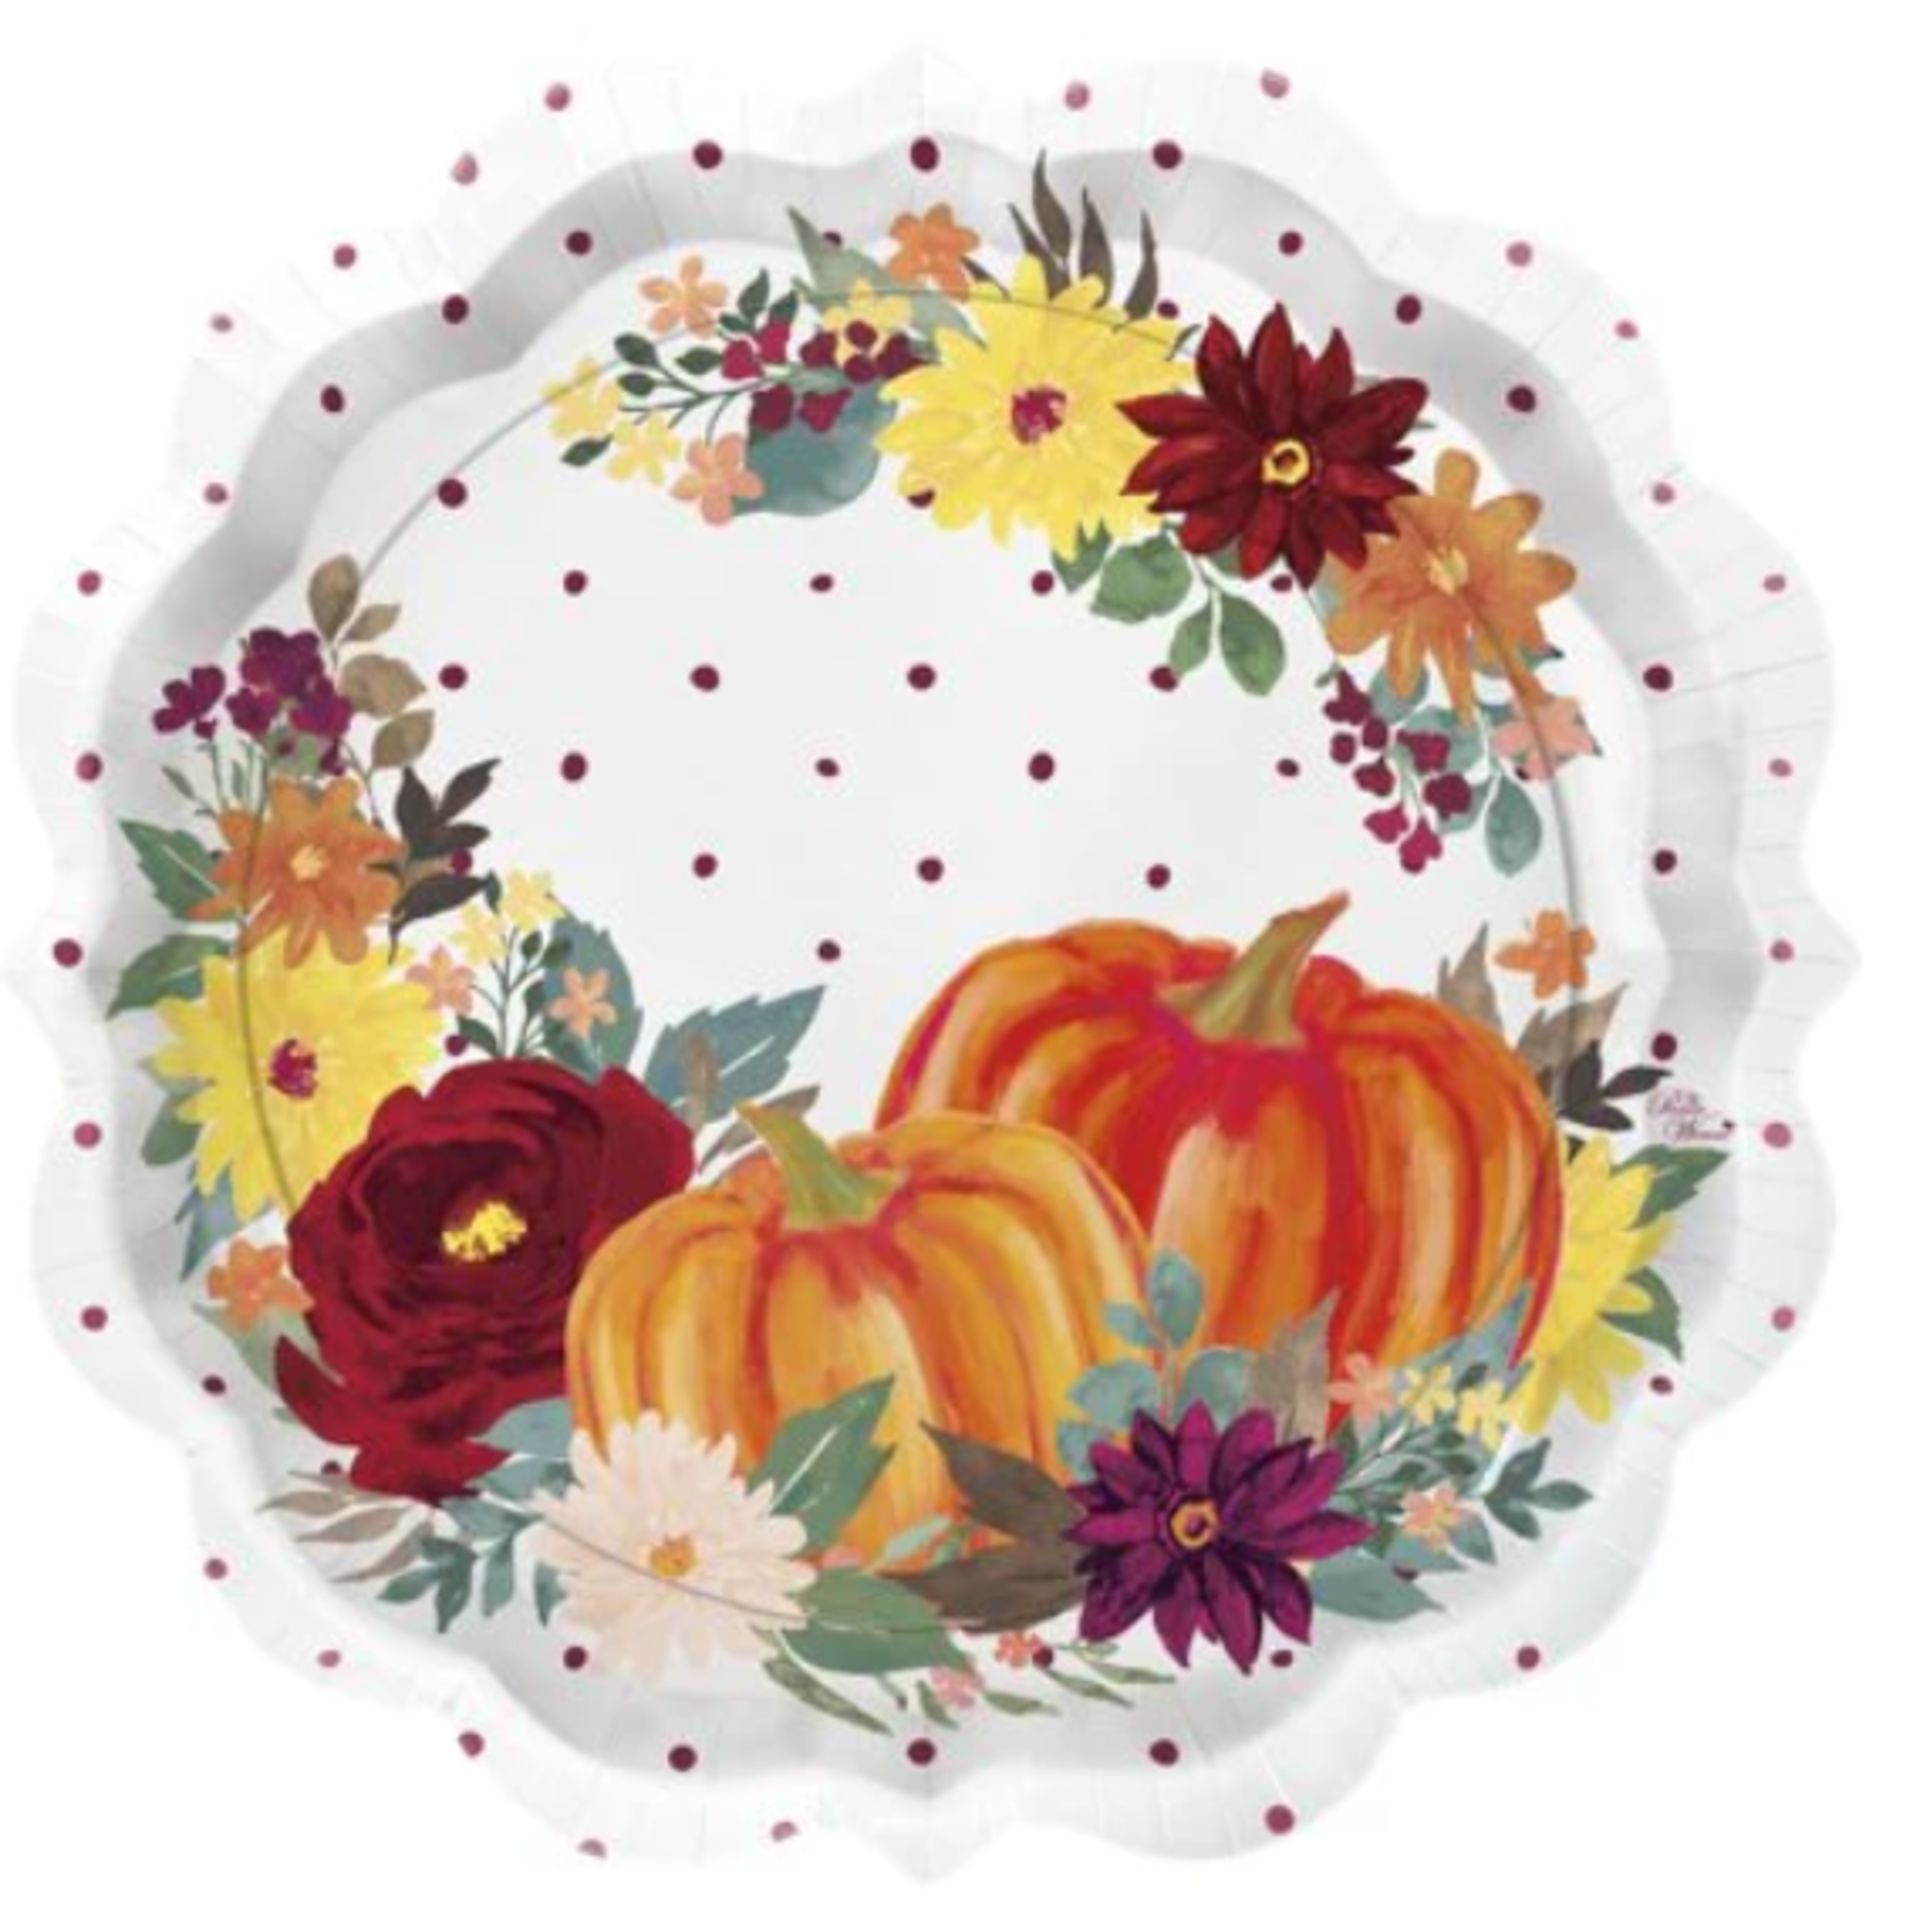 1000 PACKS OF ASSORTED HALLOWEEN PLATES, BOWLS, NAPKINS AND STRAWS, RRP £10,000 - Image 2 of 9